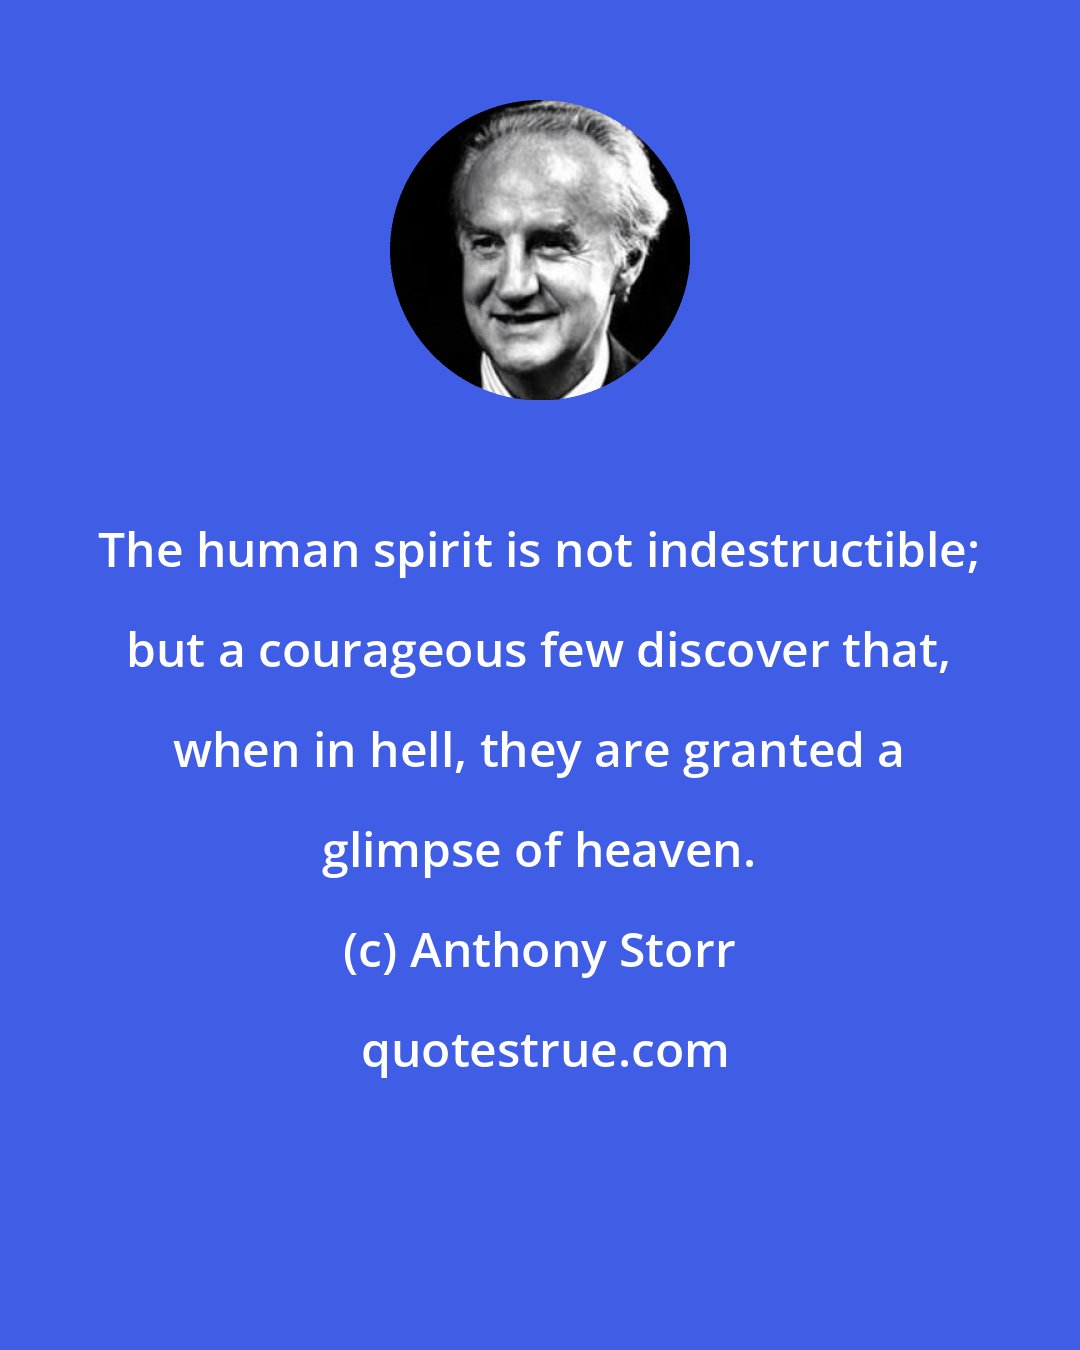 Anthony Storr: The human spirit is not indestructible; but a courageous few discover that, when in hell, they are granted a glimpse of heaven.